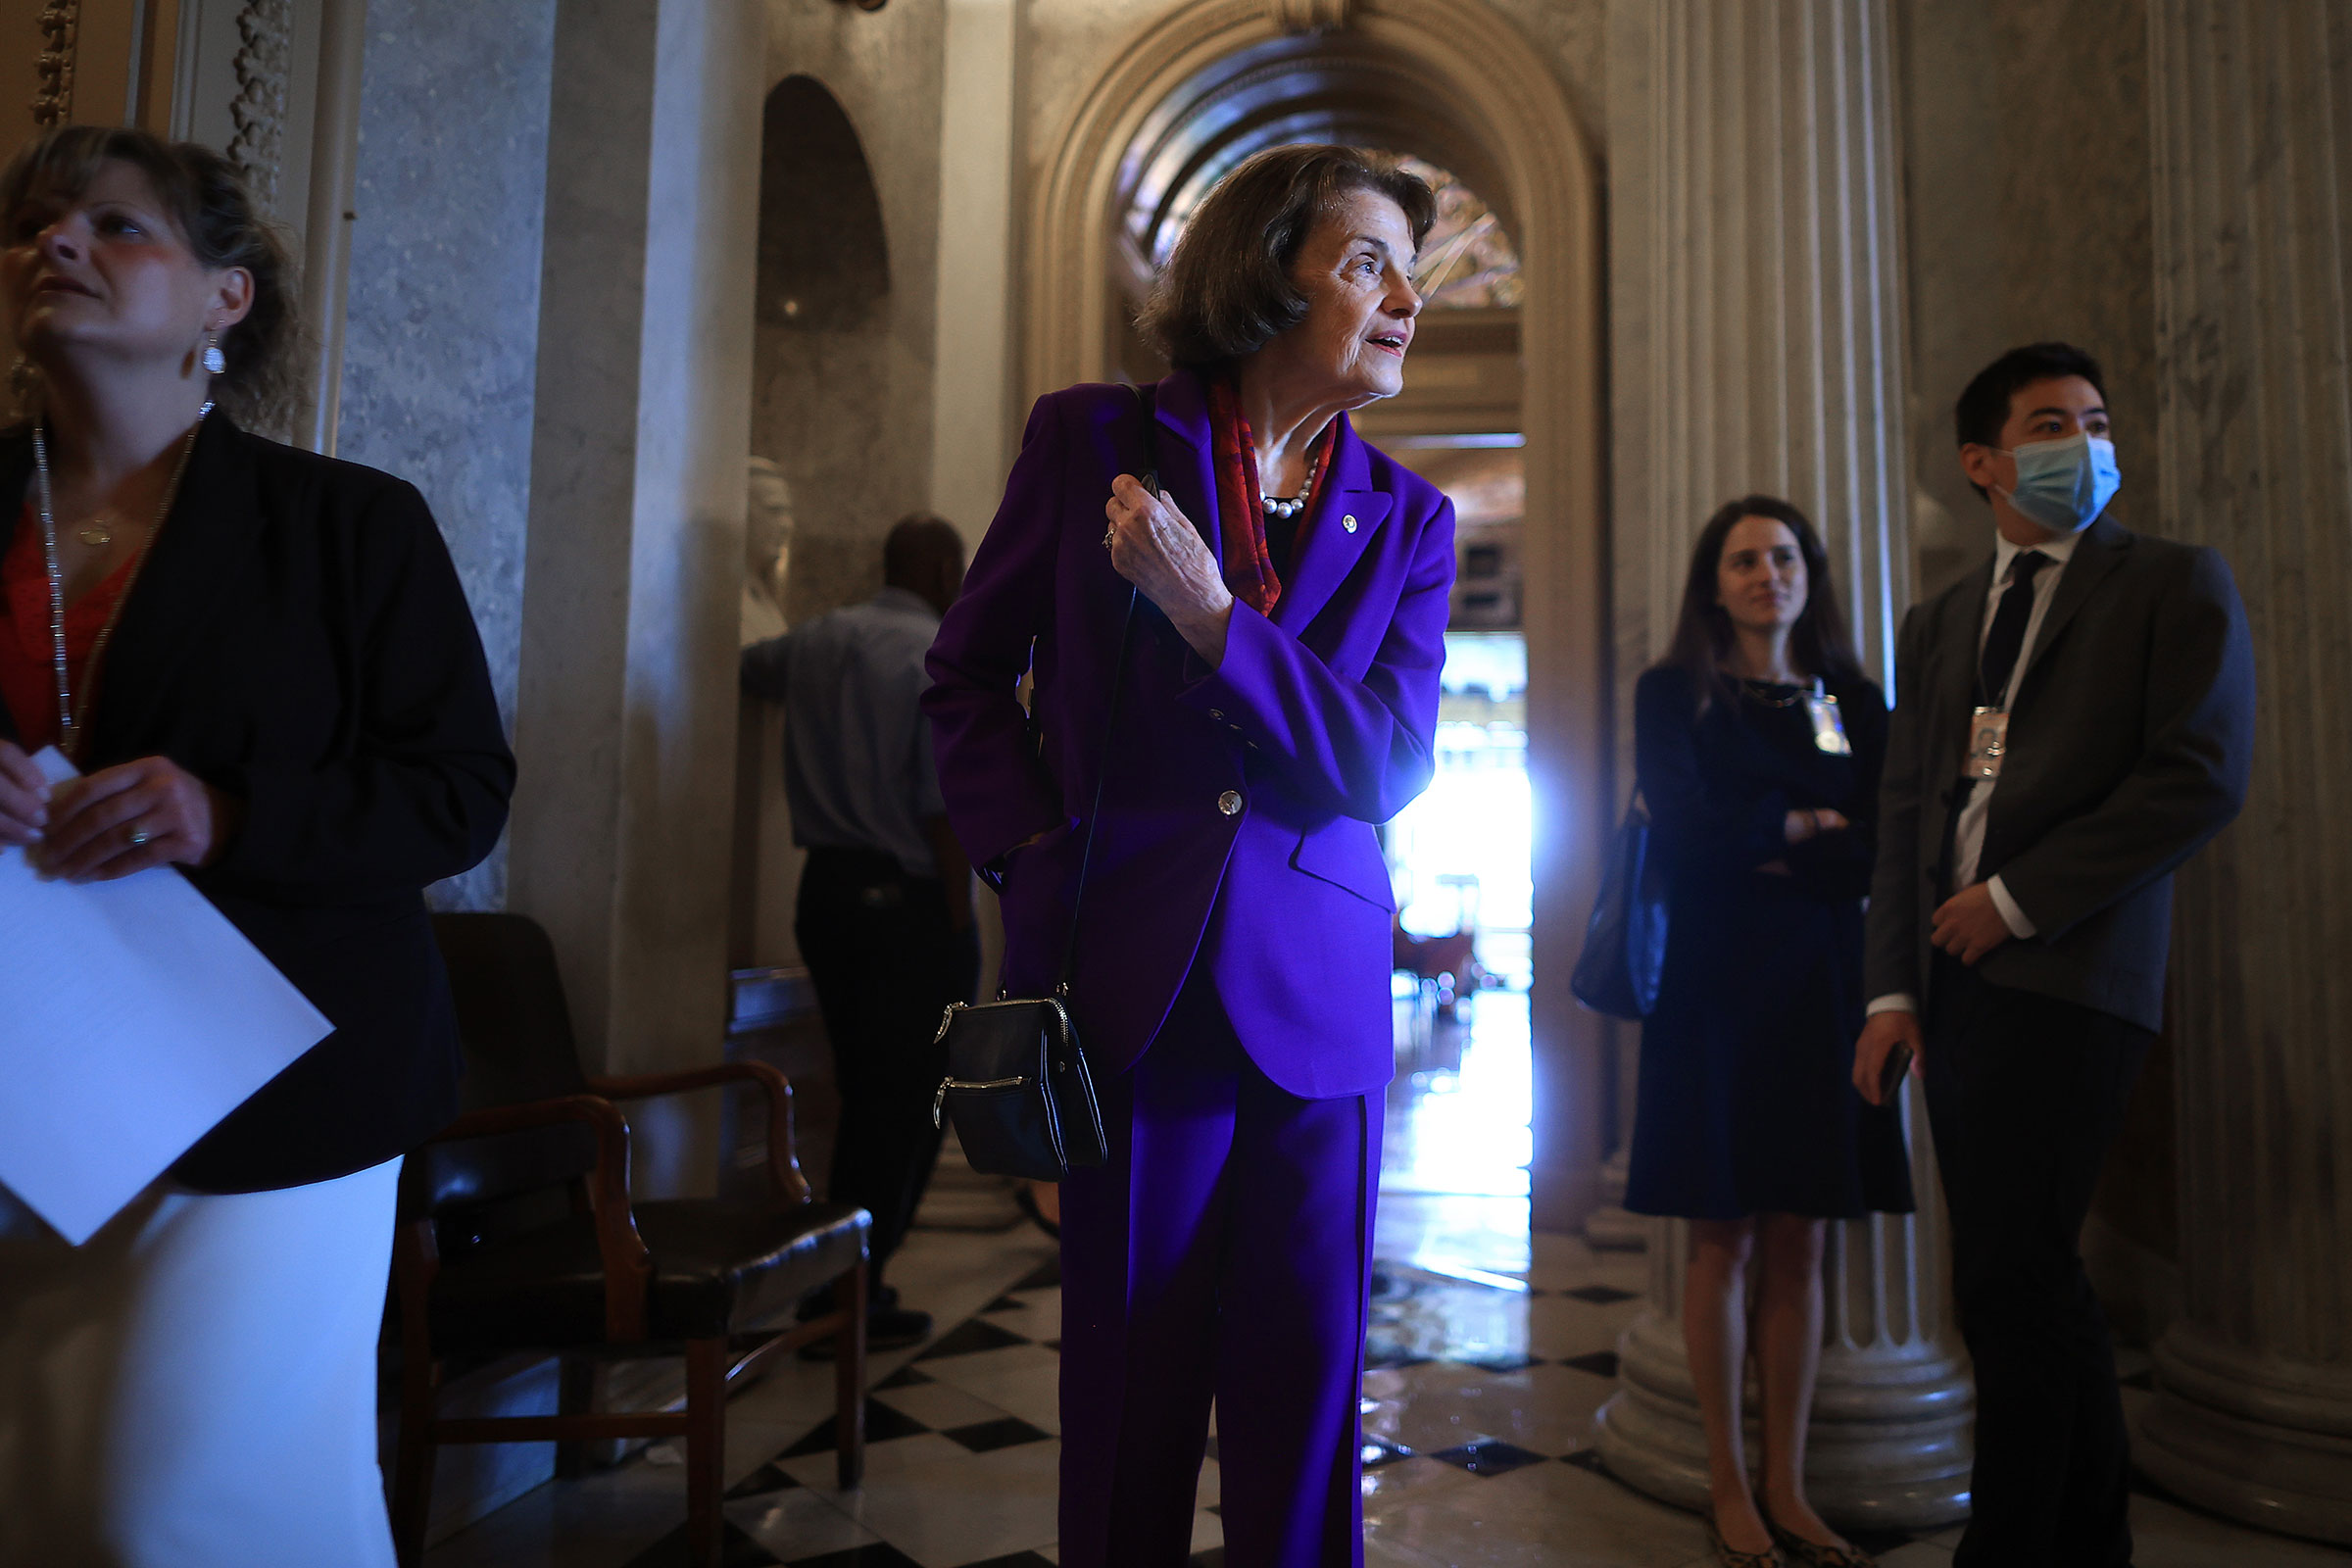 Sen. Dianne Feinstein steps out of the Senate Chamber after voting at the U.S. Capitol on July 21, 2021. (Chip Somodevilla—Getty Images)